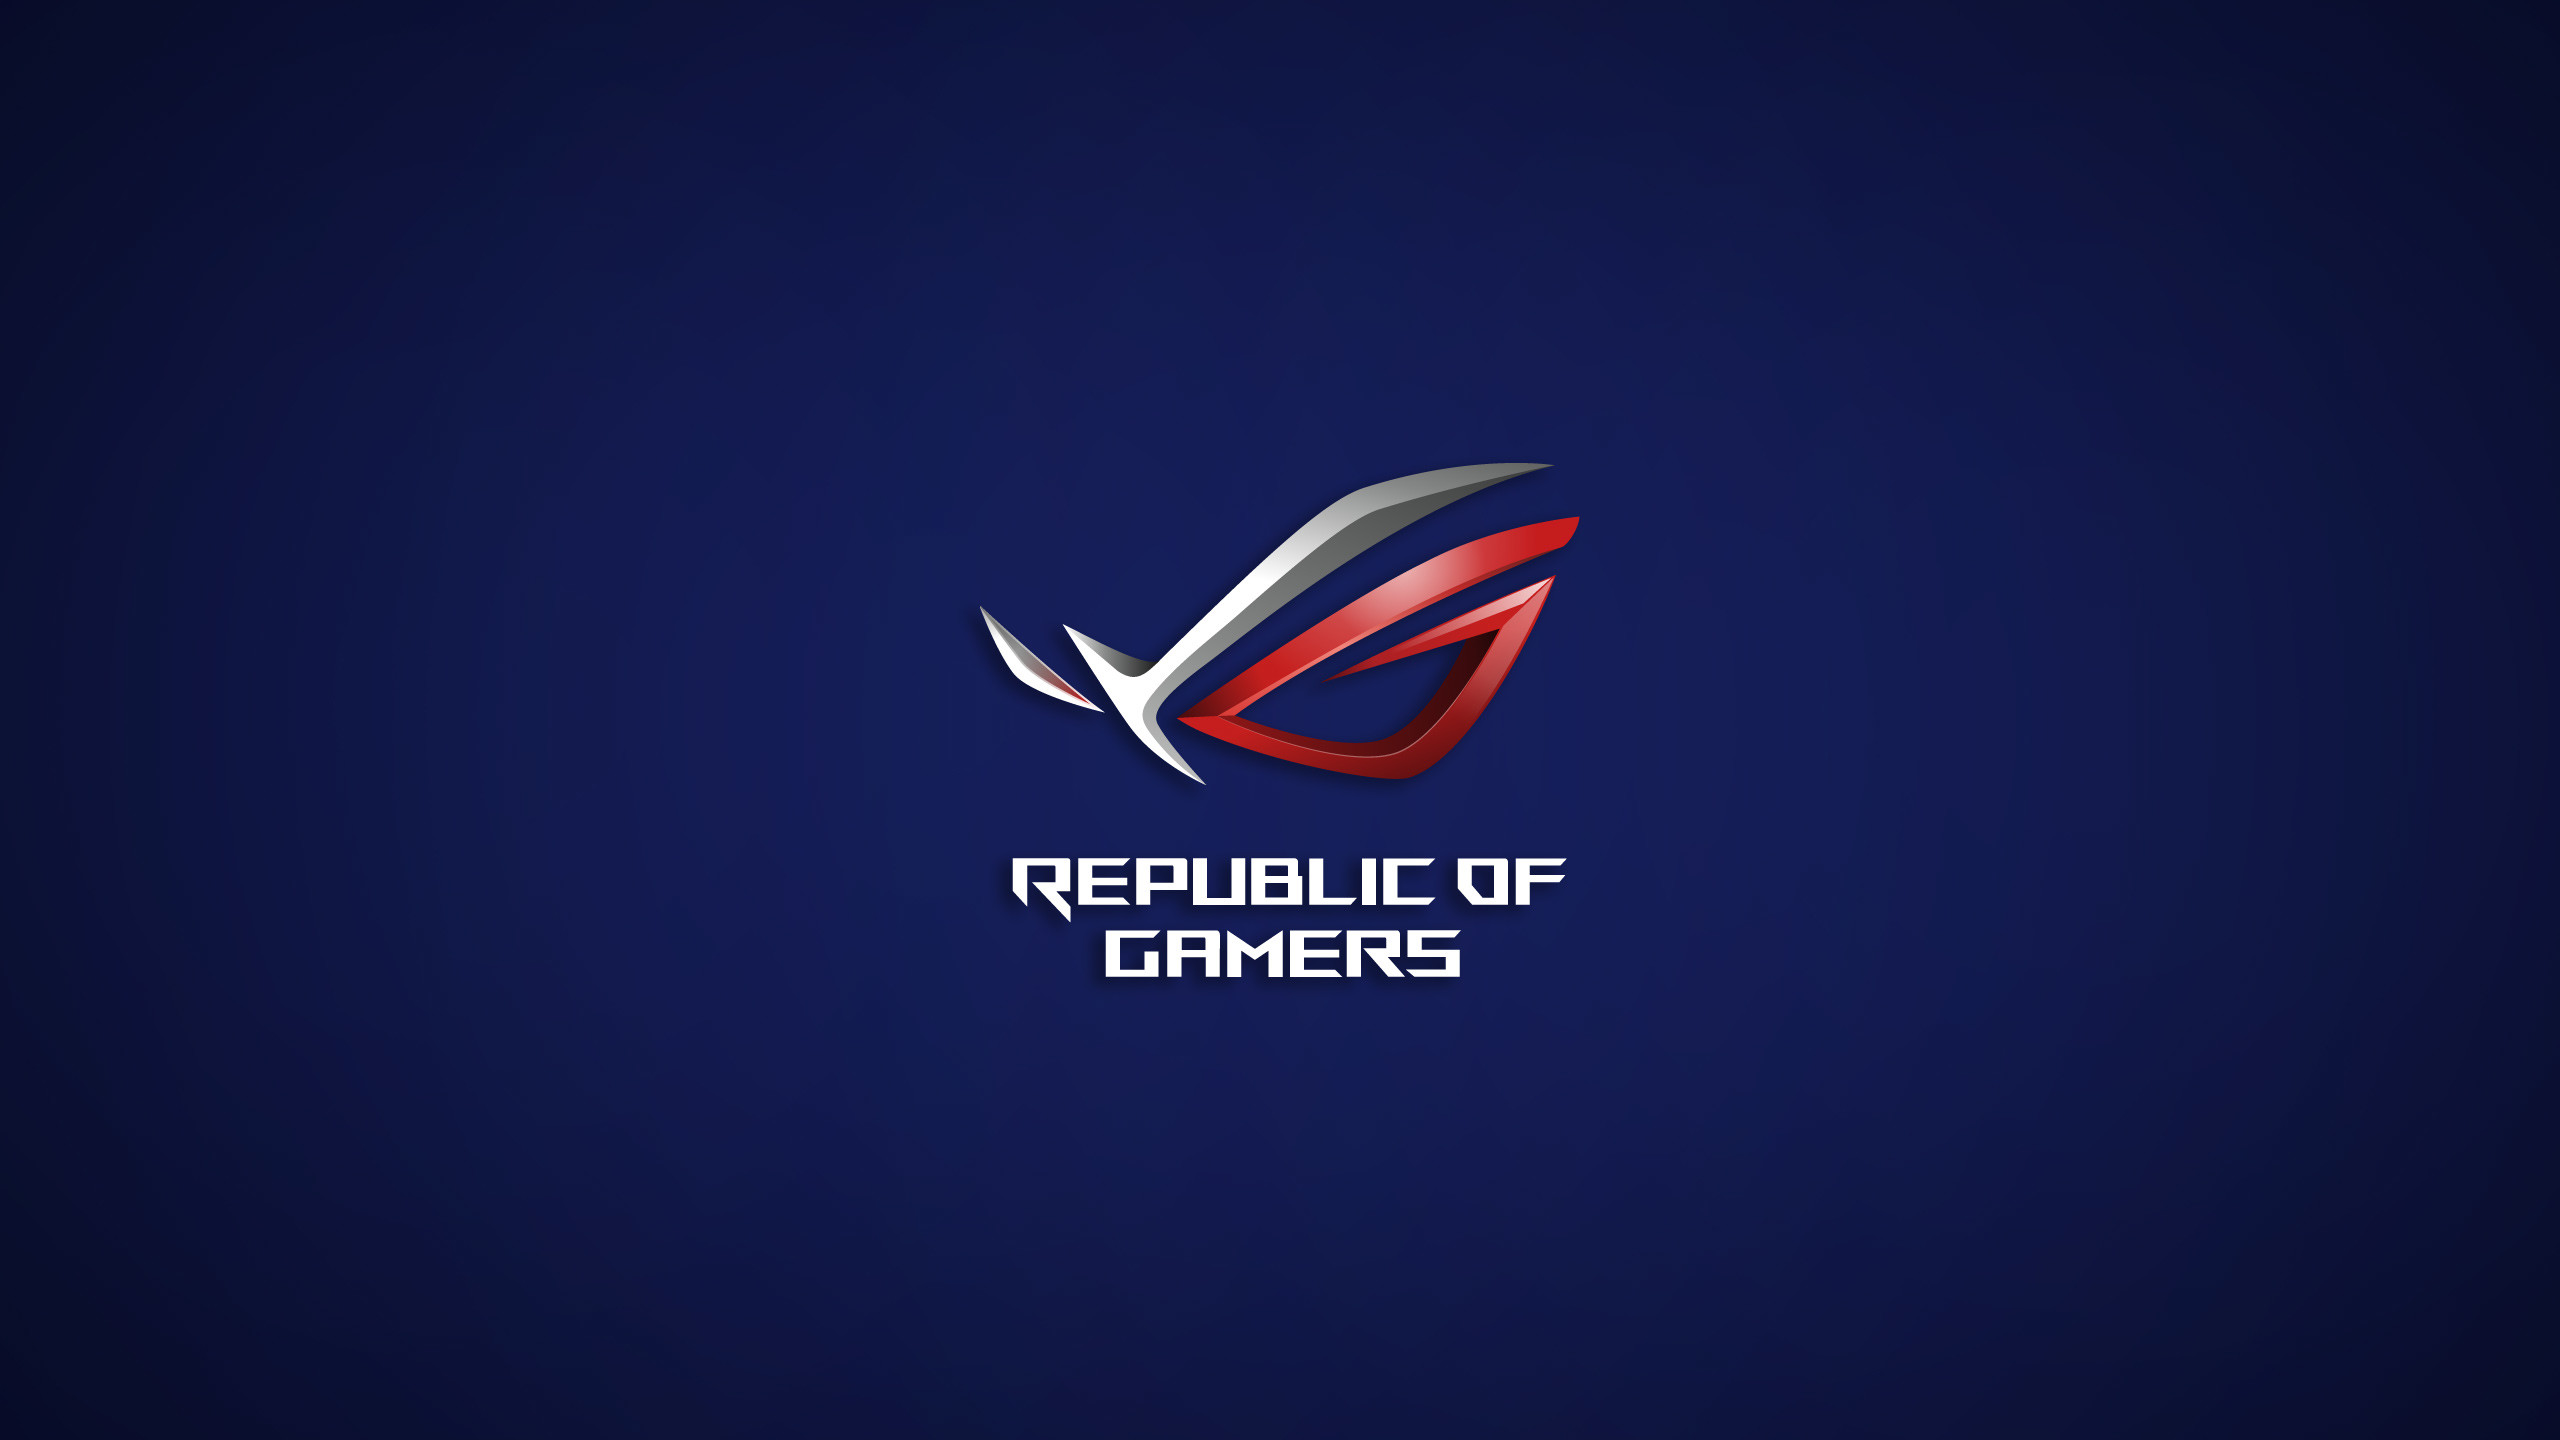 ROG ASUS Republic of Gamers – wallpaper is uploaded on . We hope you like it